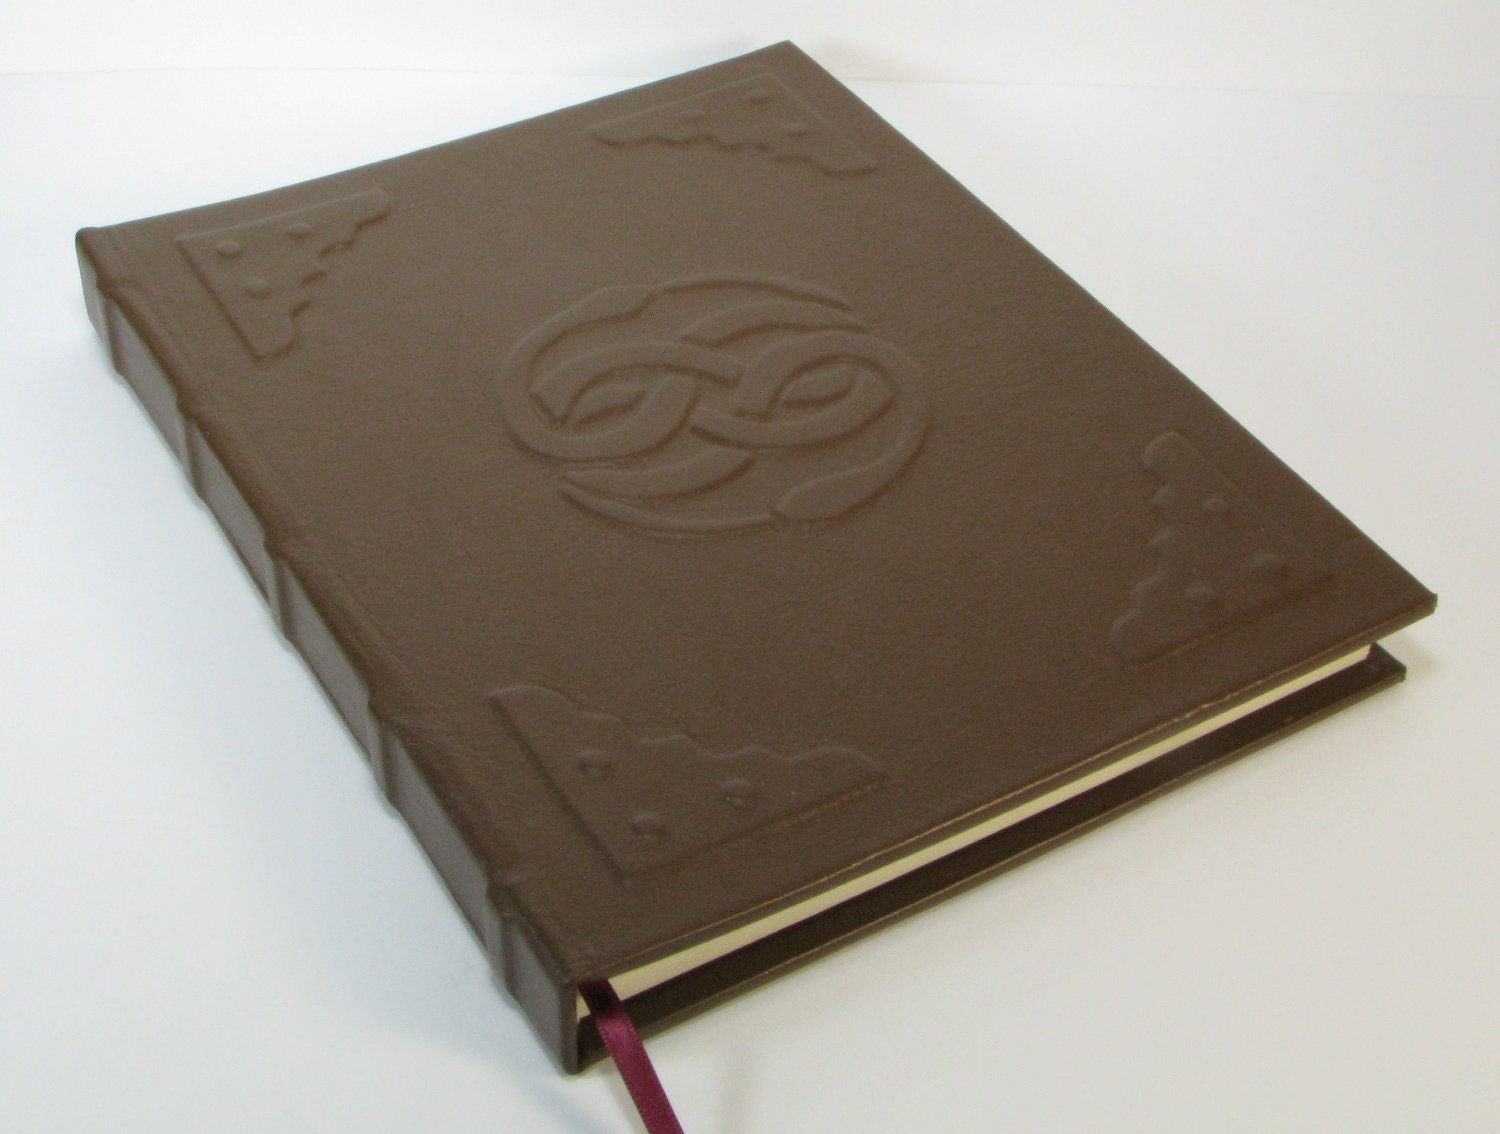 Leather Journal Inspired by the Never Ending Story